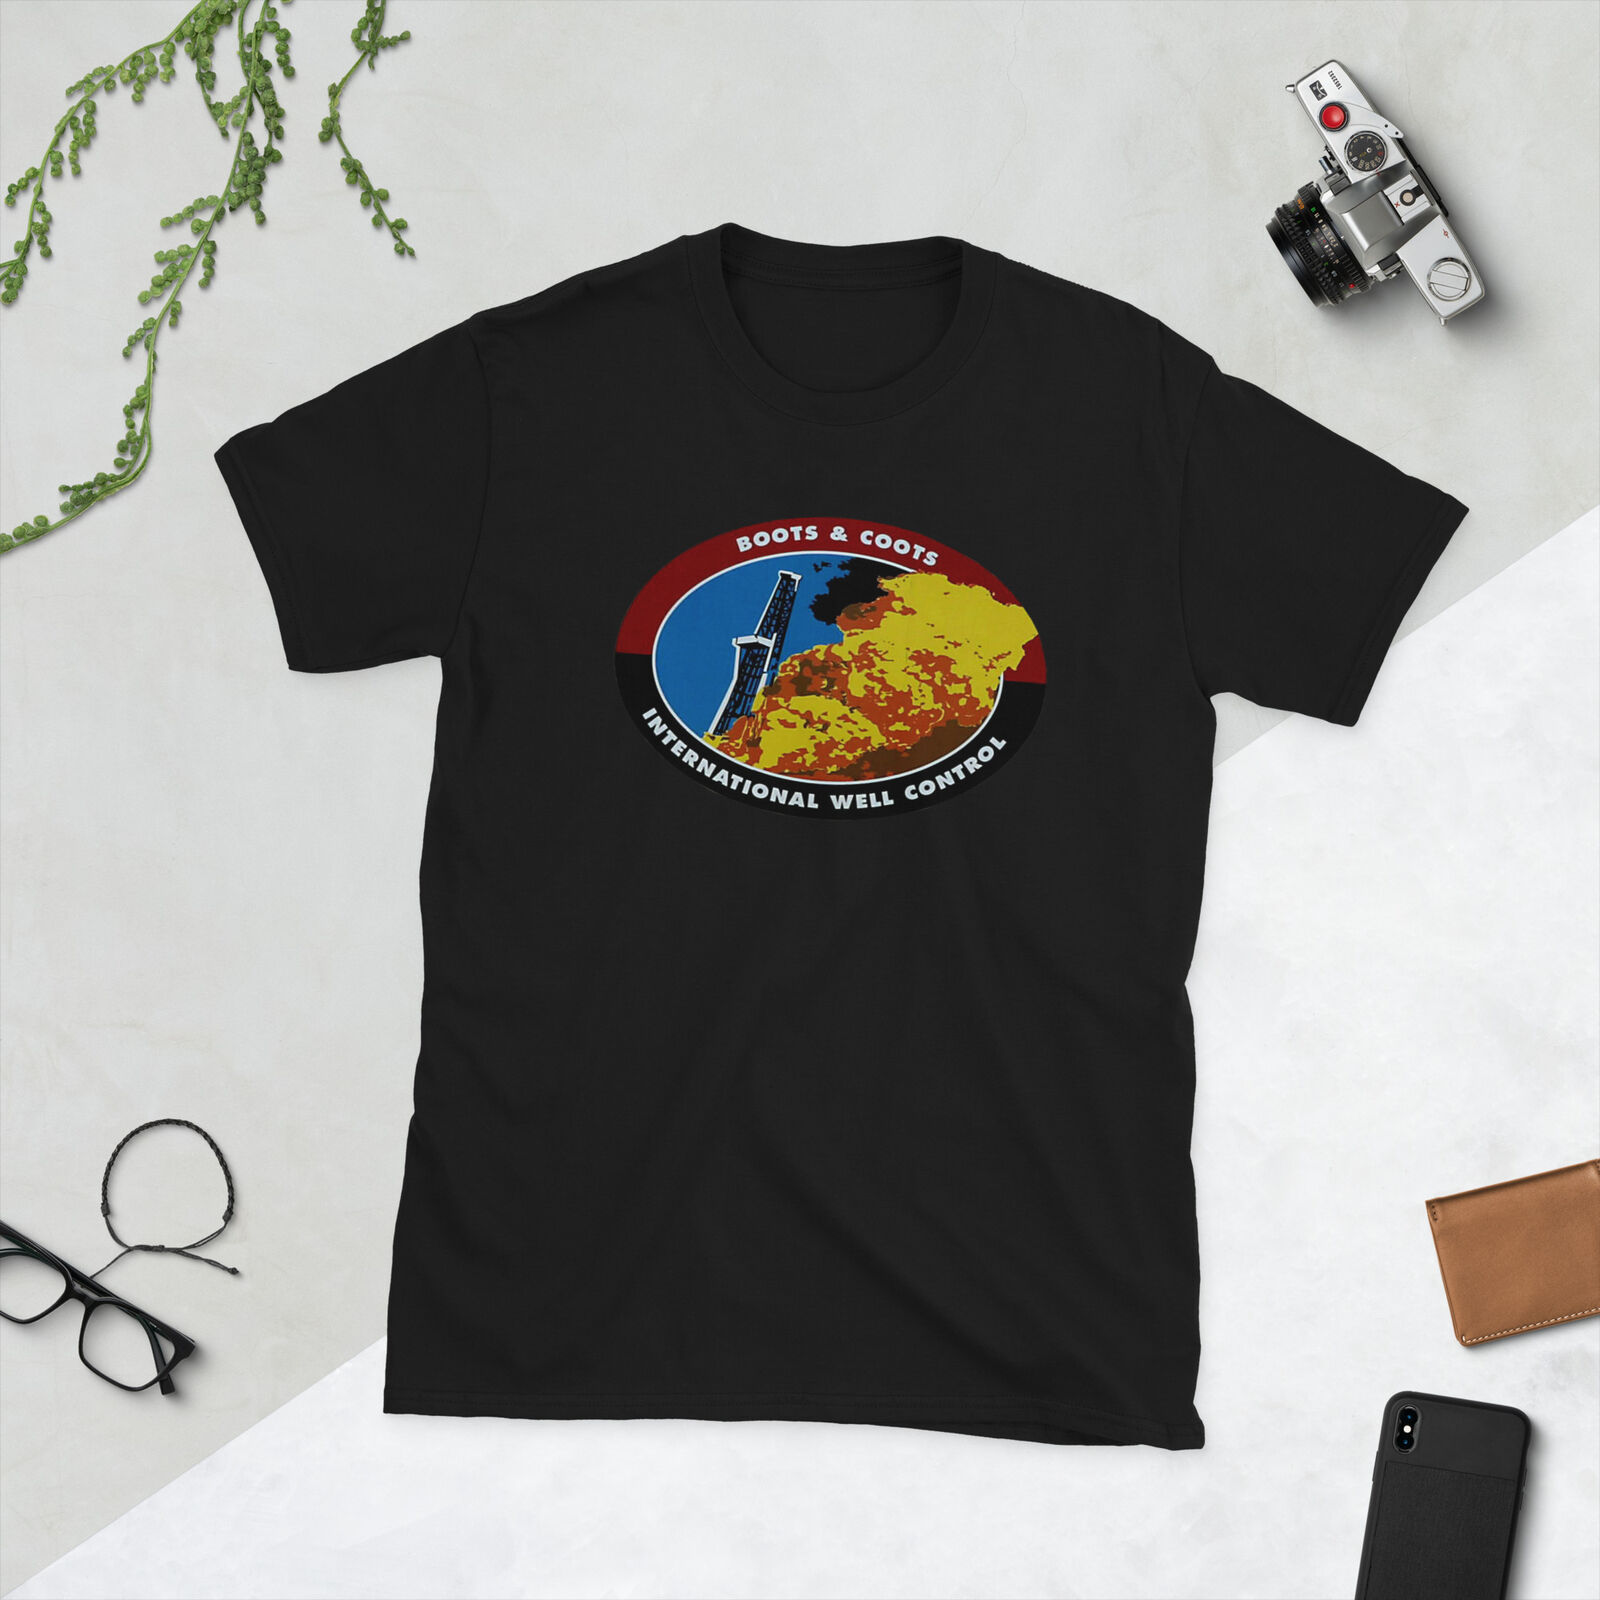 Vintage Boots and Coots Short-Sleeve Unisex T-Shirt